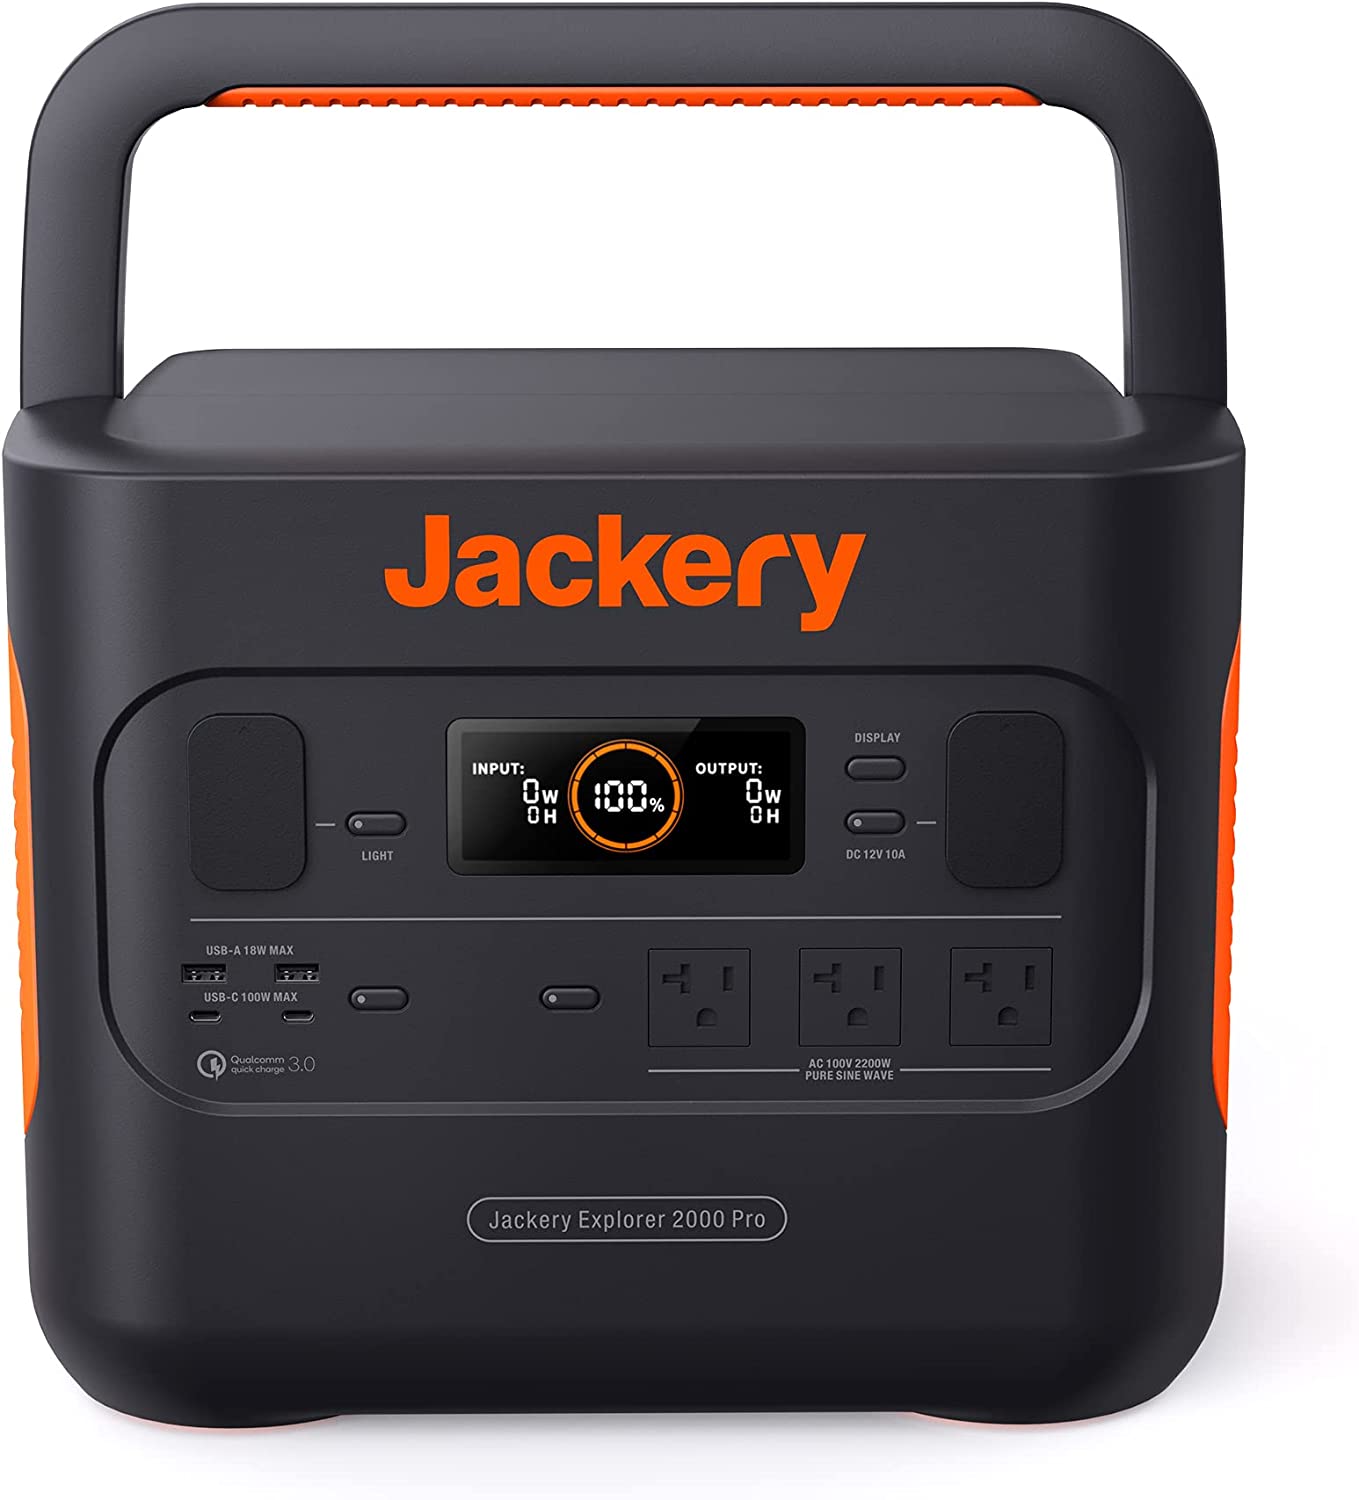 Jackery Explorer 2000 PRO Portable Power Station, 2160Wh Capacity with 3 x 2200W AC Outlets, Fast Charging, Solar Generator